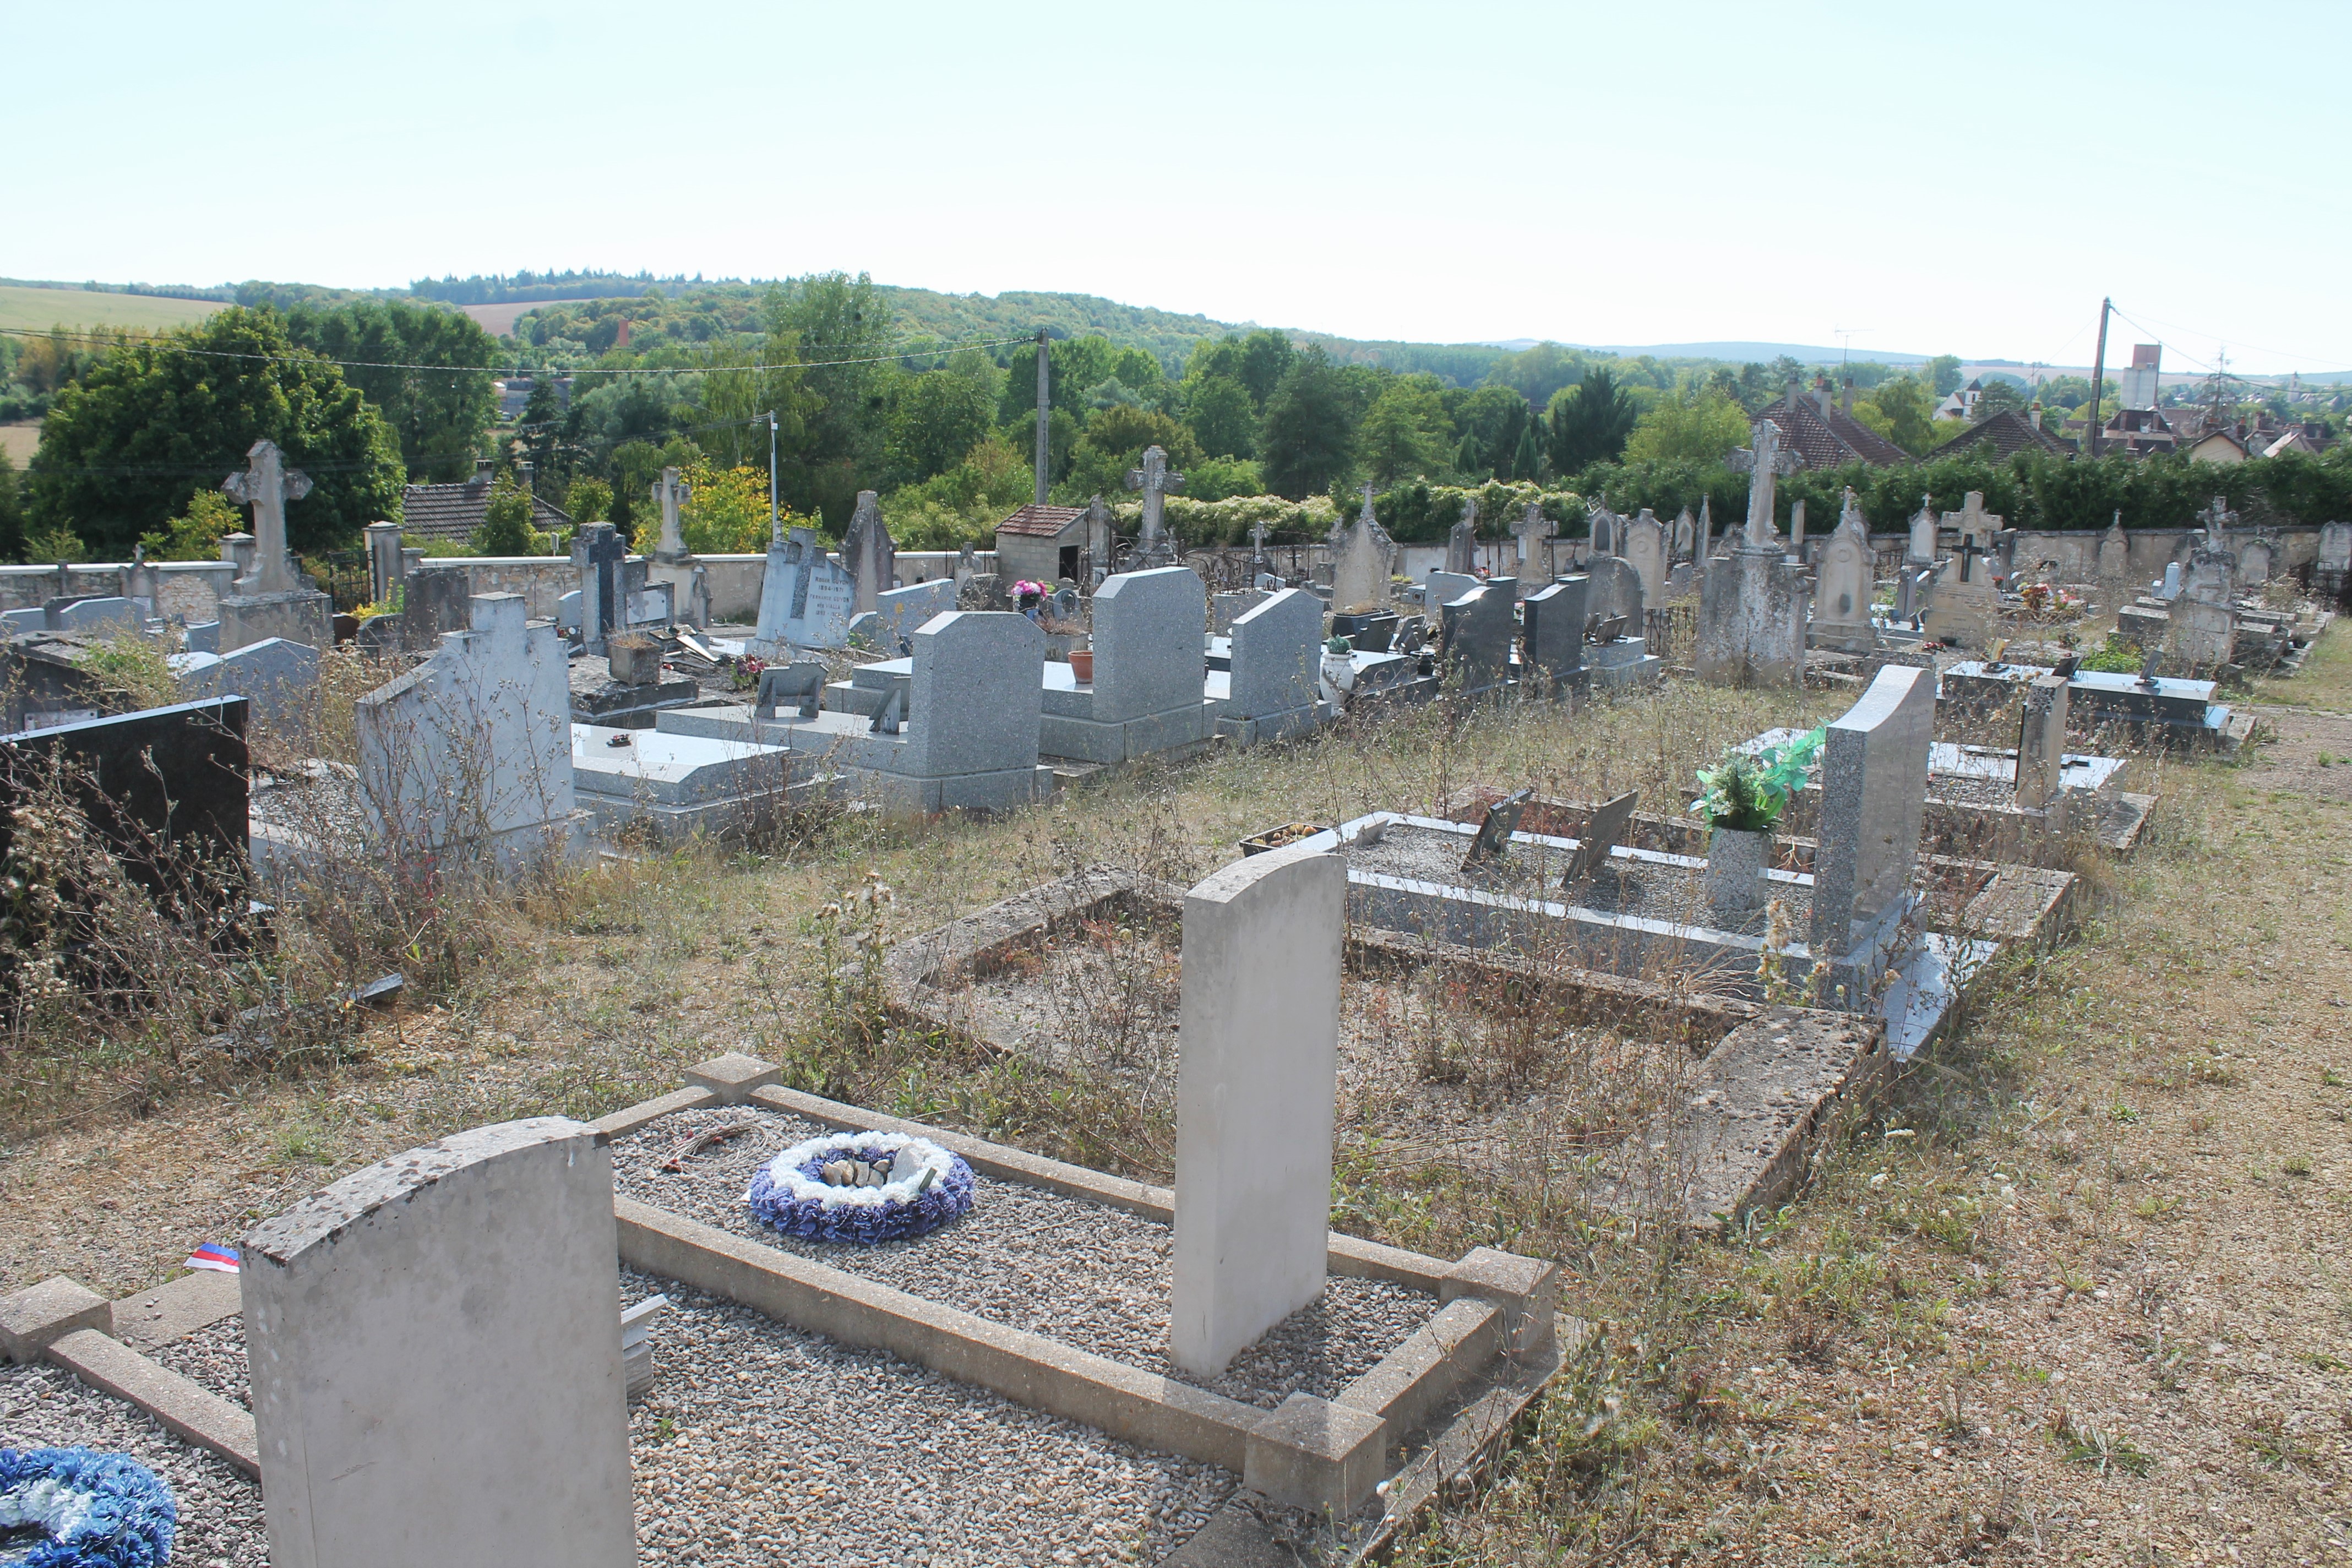 View of Crain from the graves (from Nicholas Vincent)